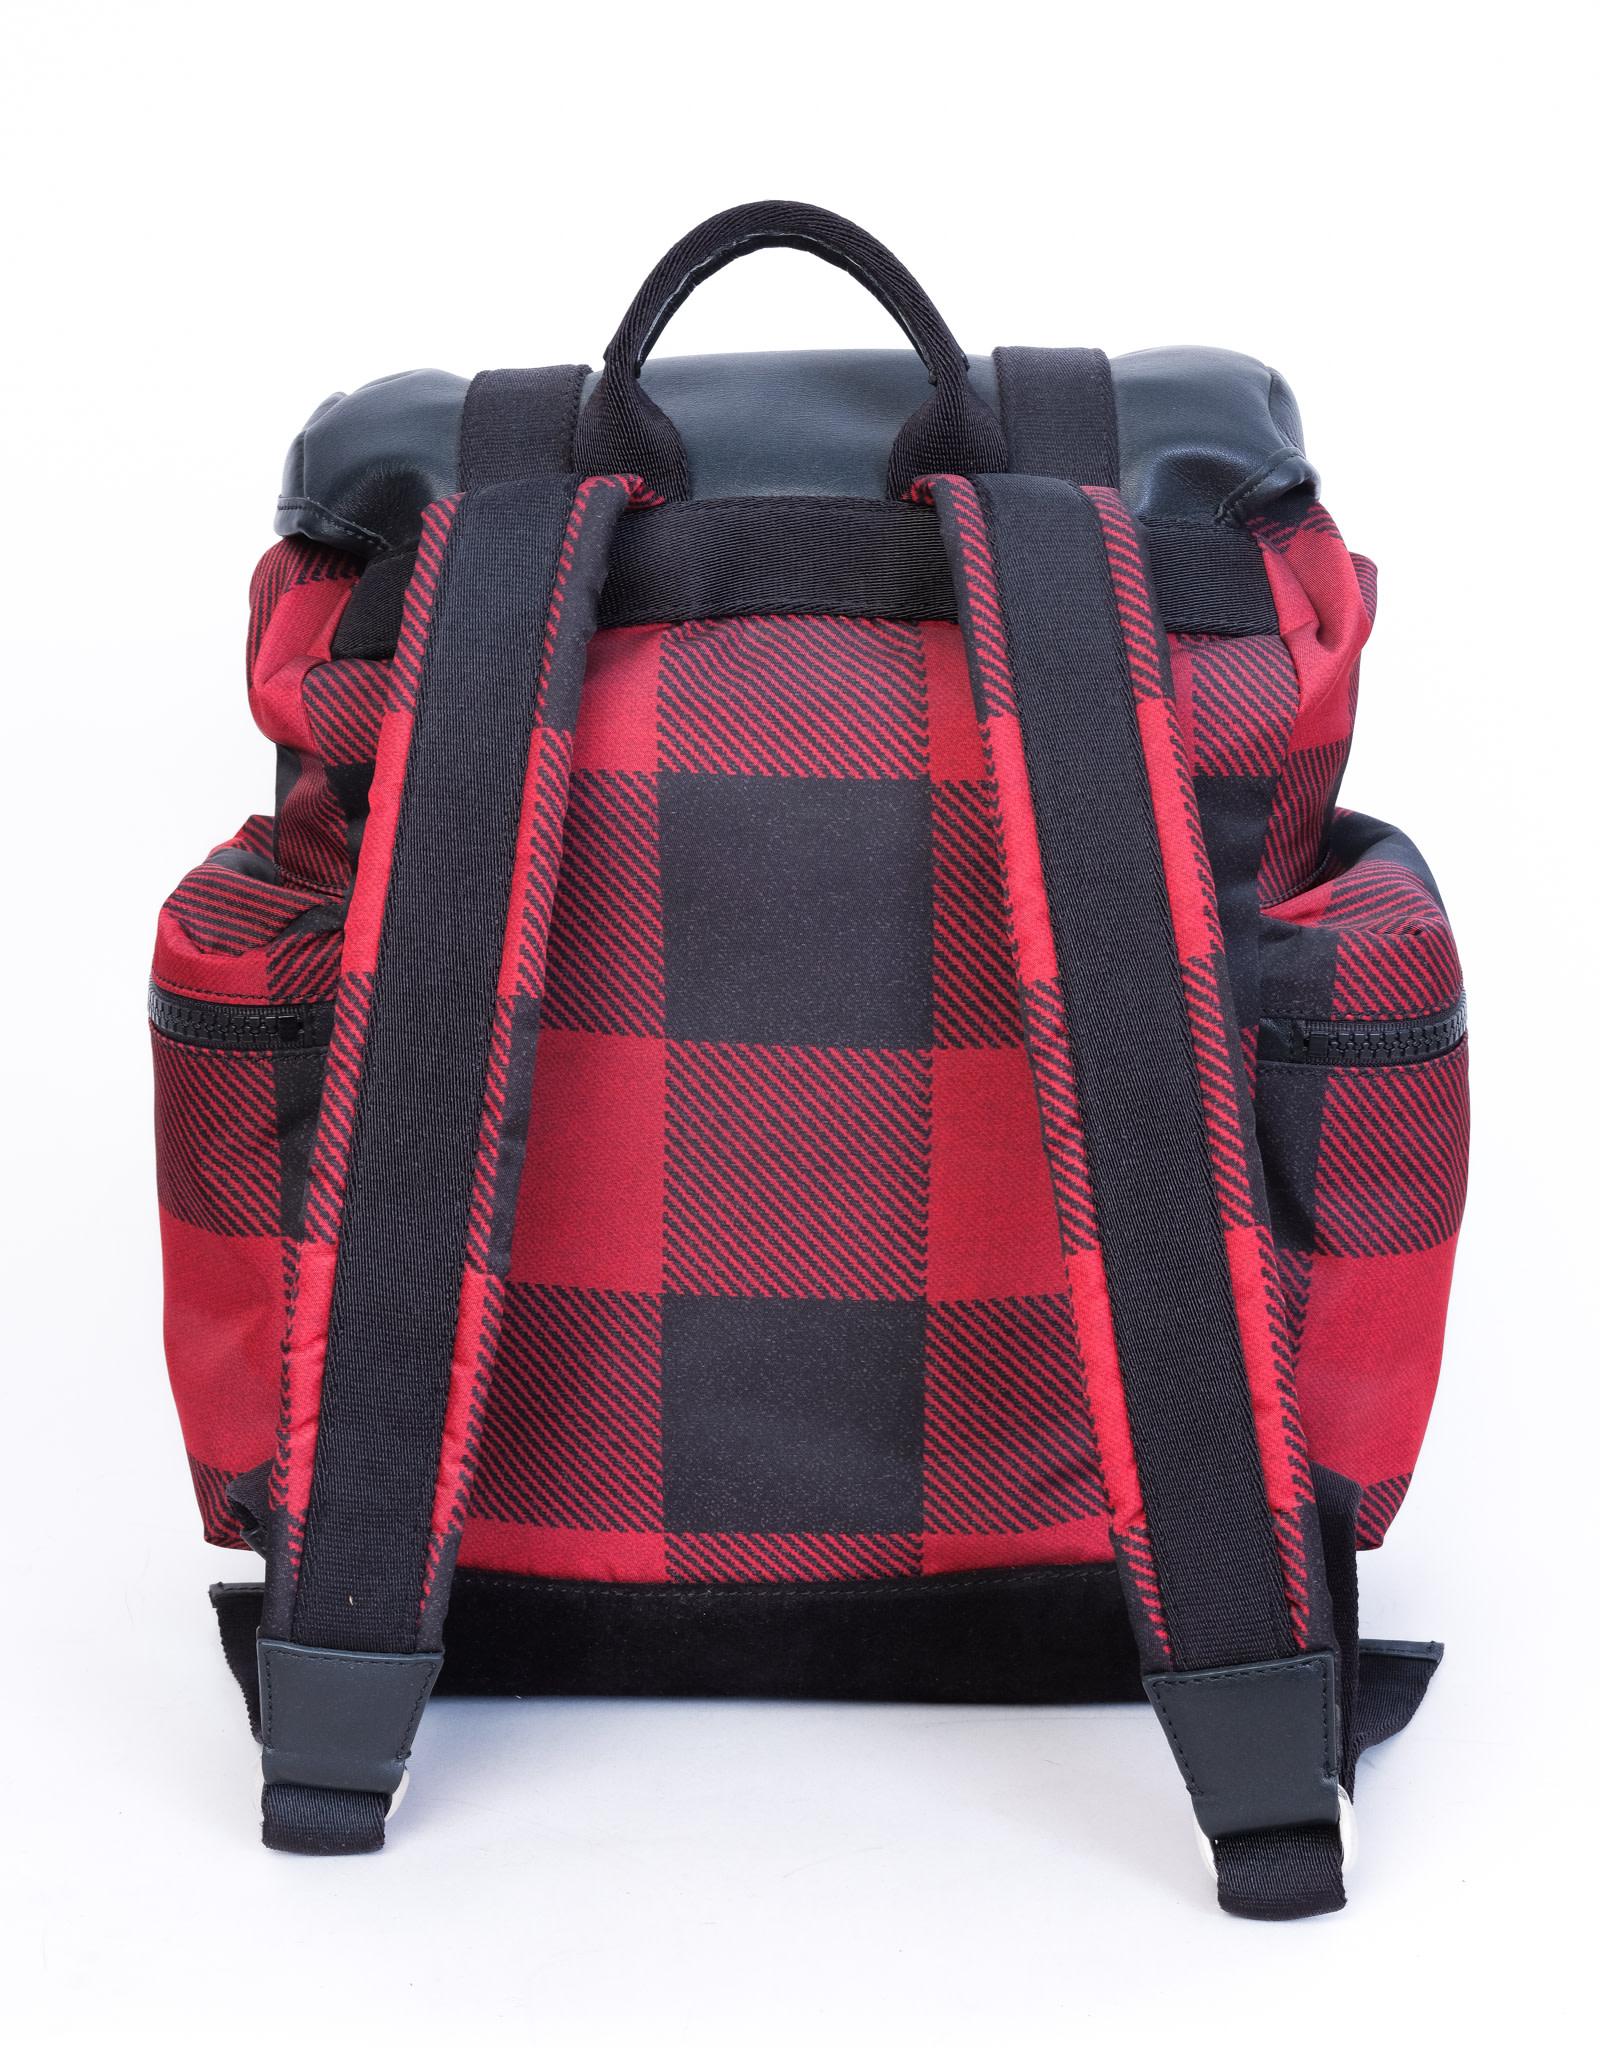 Dsquared2 Backpack Black and Red Plaid Rucksack Style Bag 